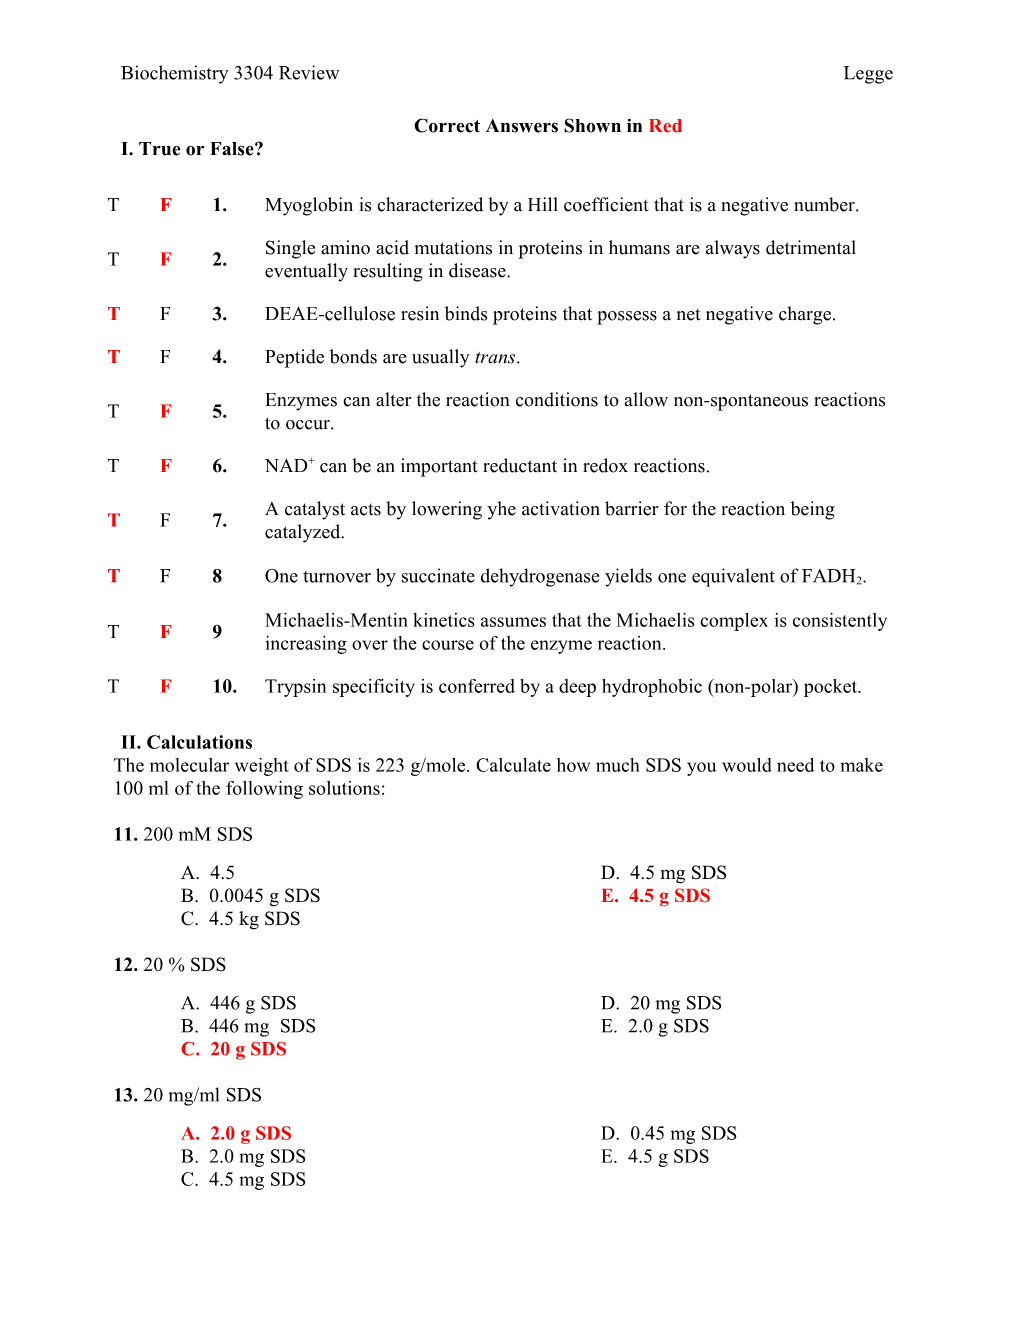 Correct Answers Shown in Red